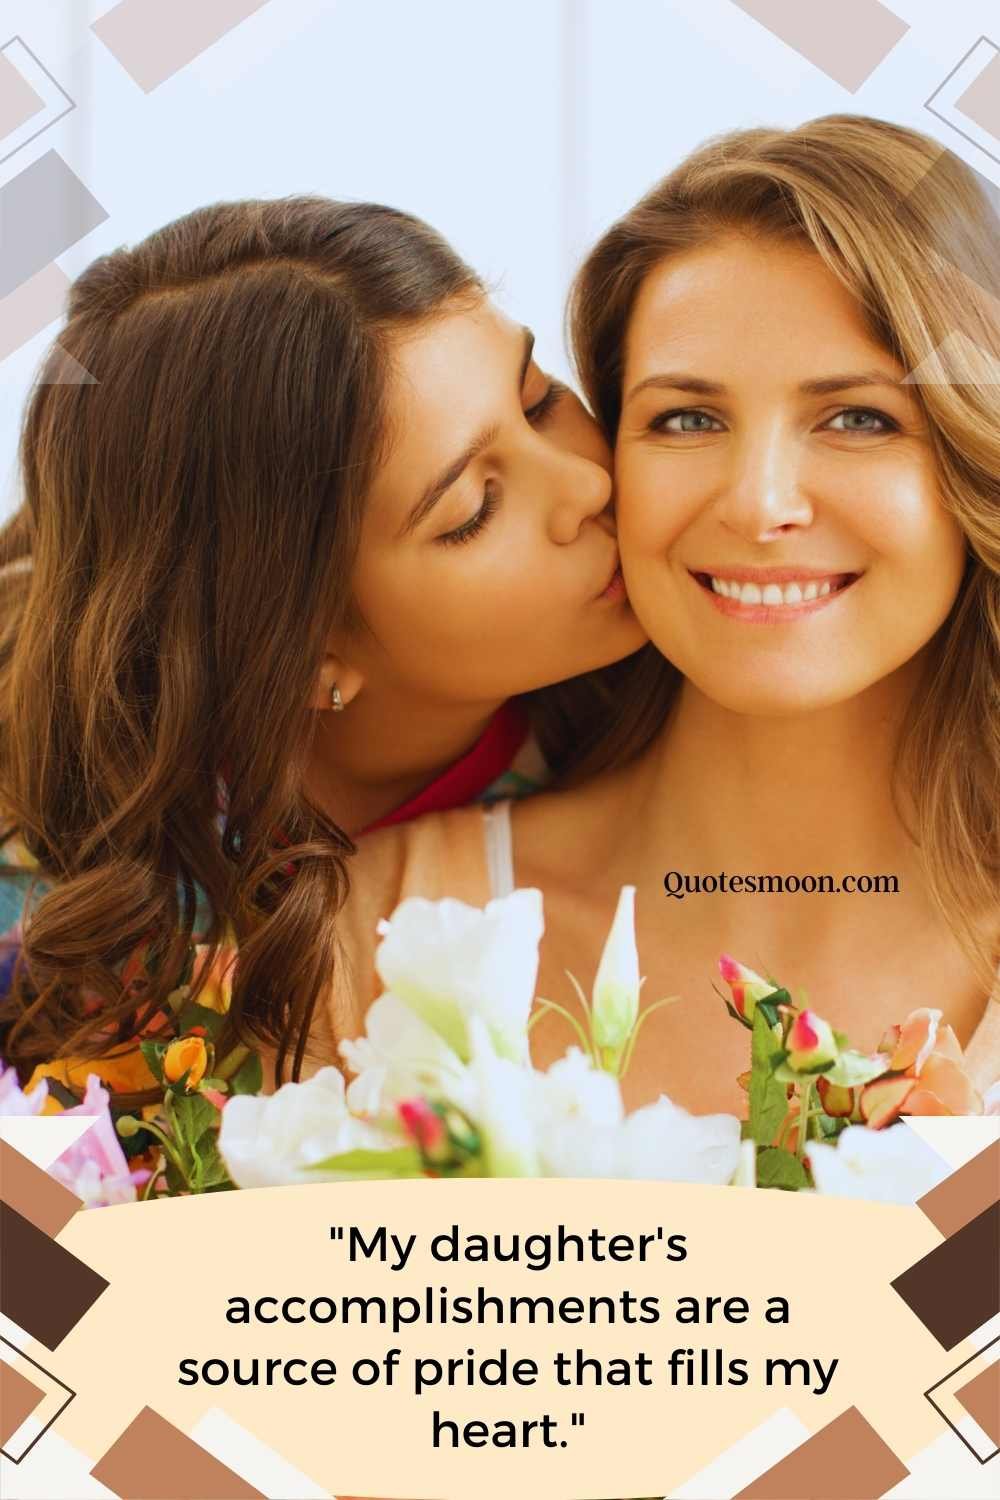 proud mom to daghter quotes images